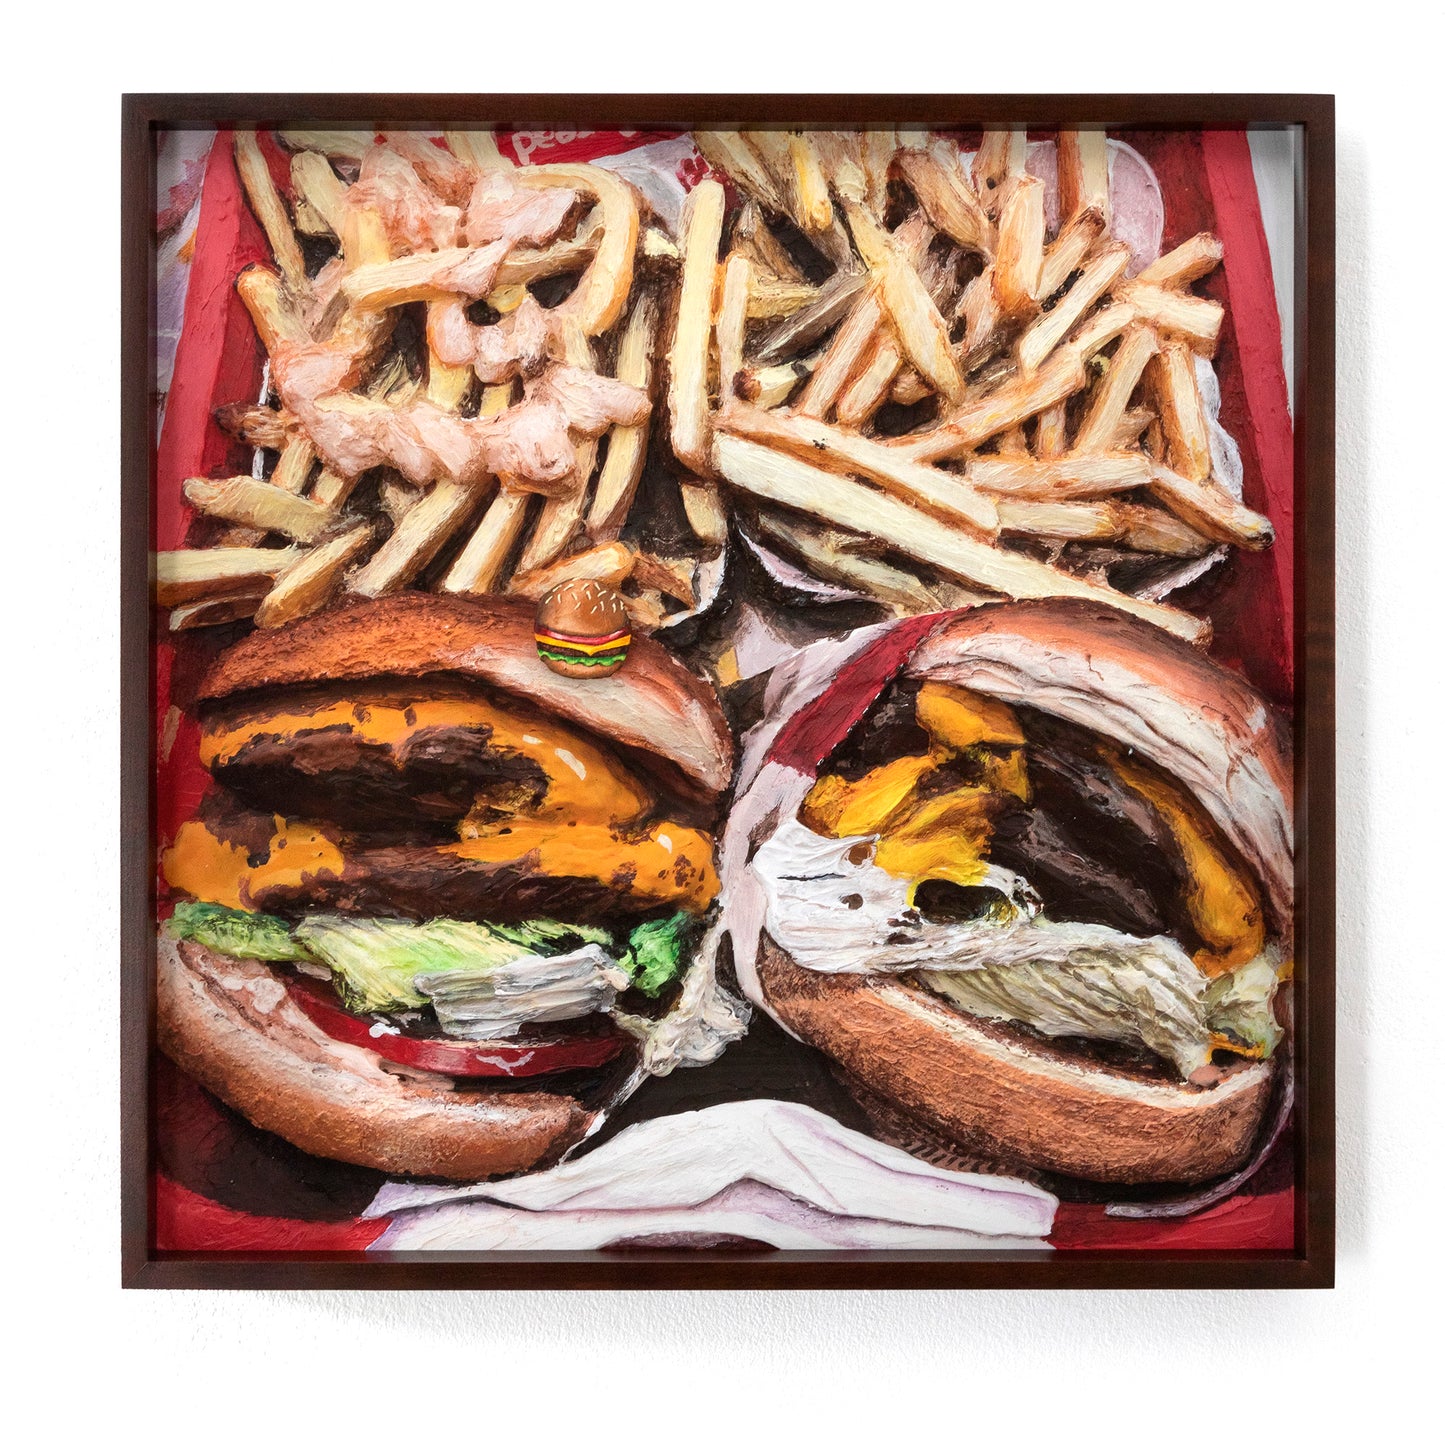 a digital print  of  two cheesburger with fries by the artist gina  beavers